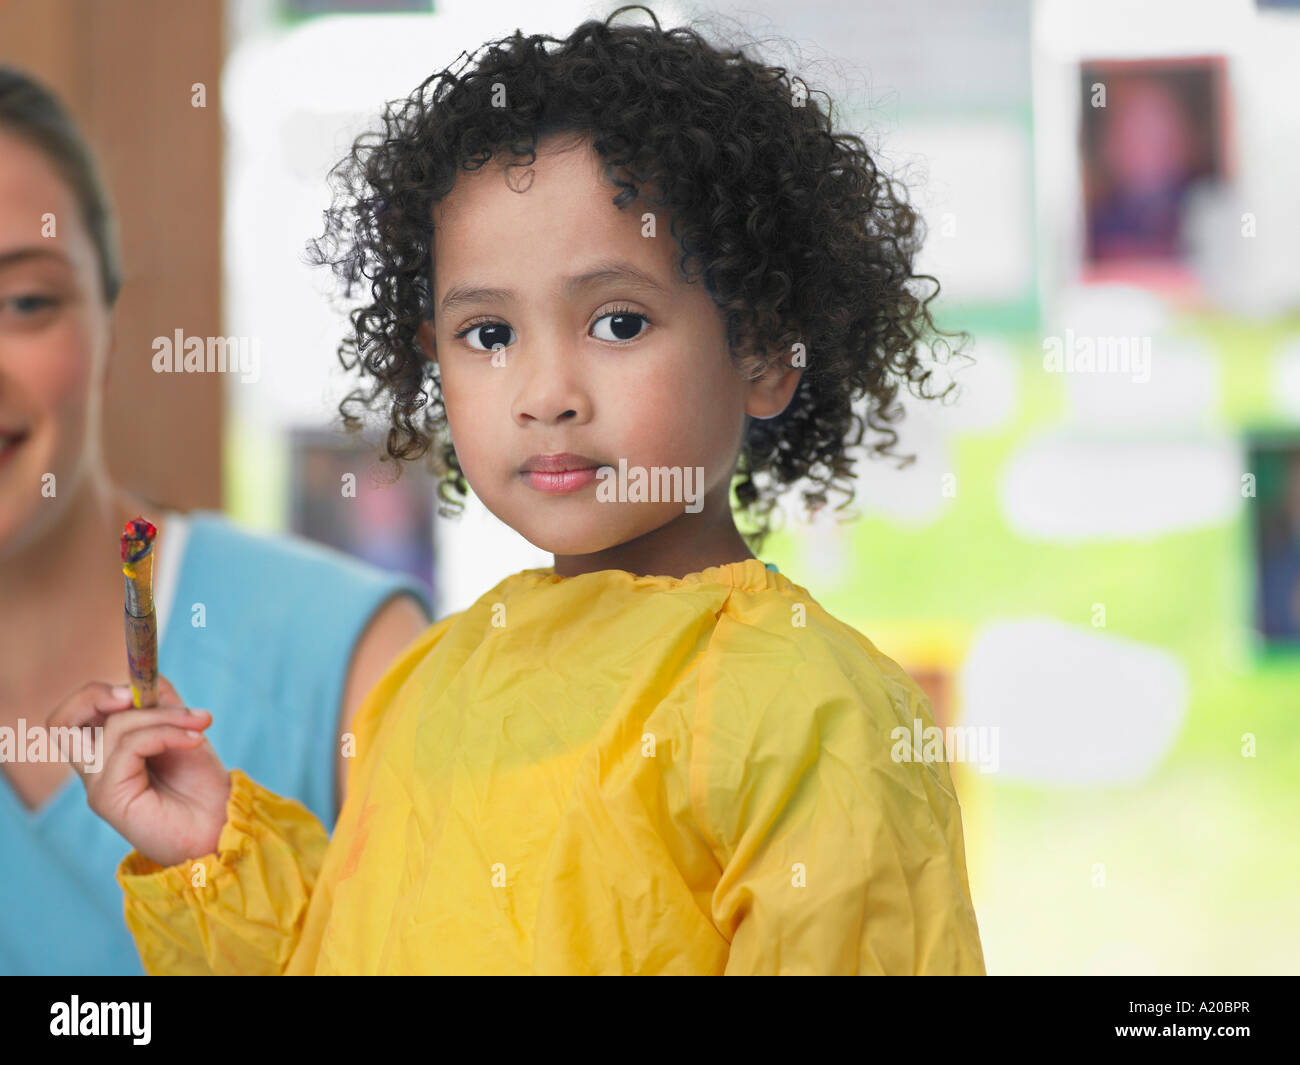 Girl painting in art class, portrait Stock Photo